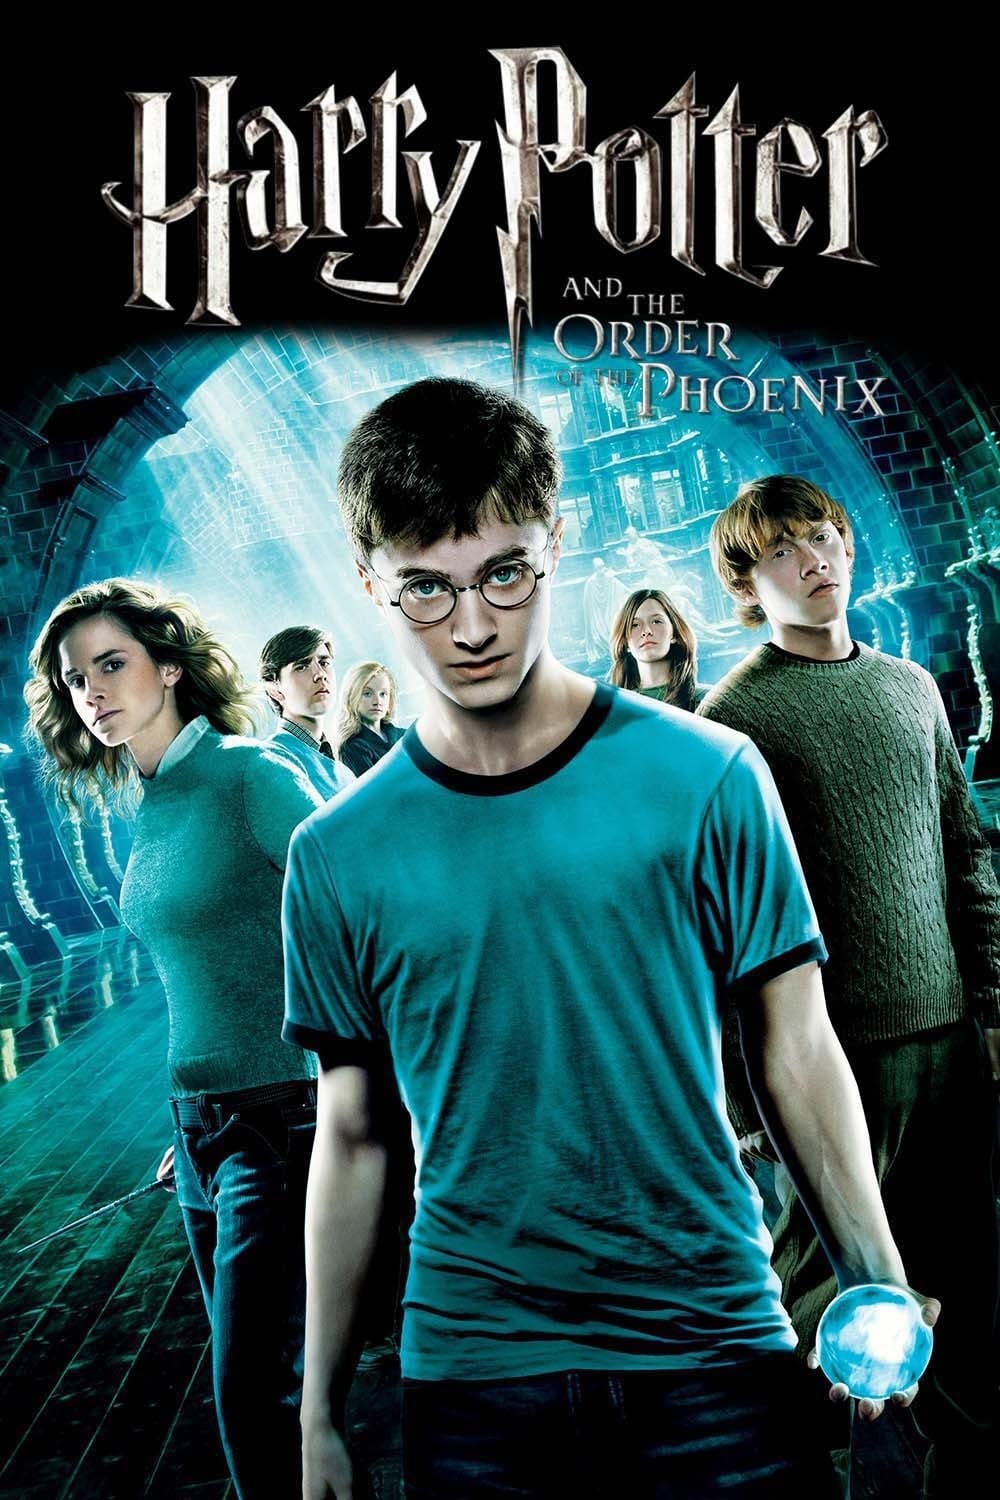 Harry Potter and the Forbidden Journey (Video 2010) - IMDb